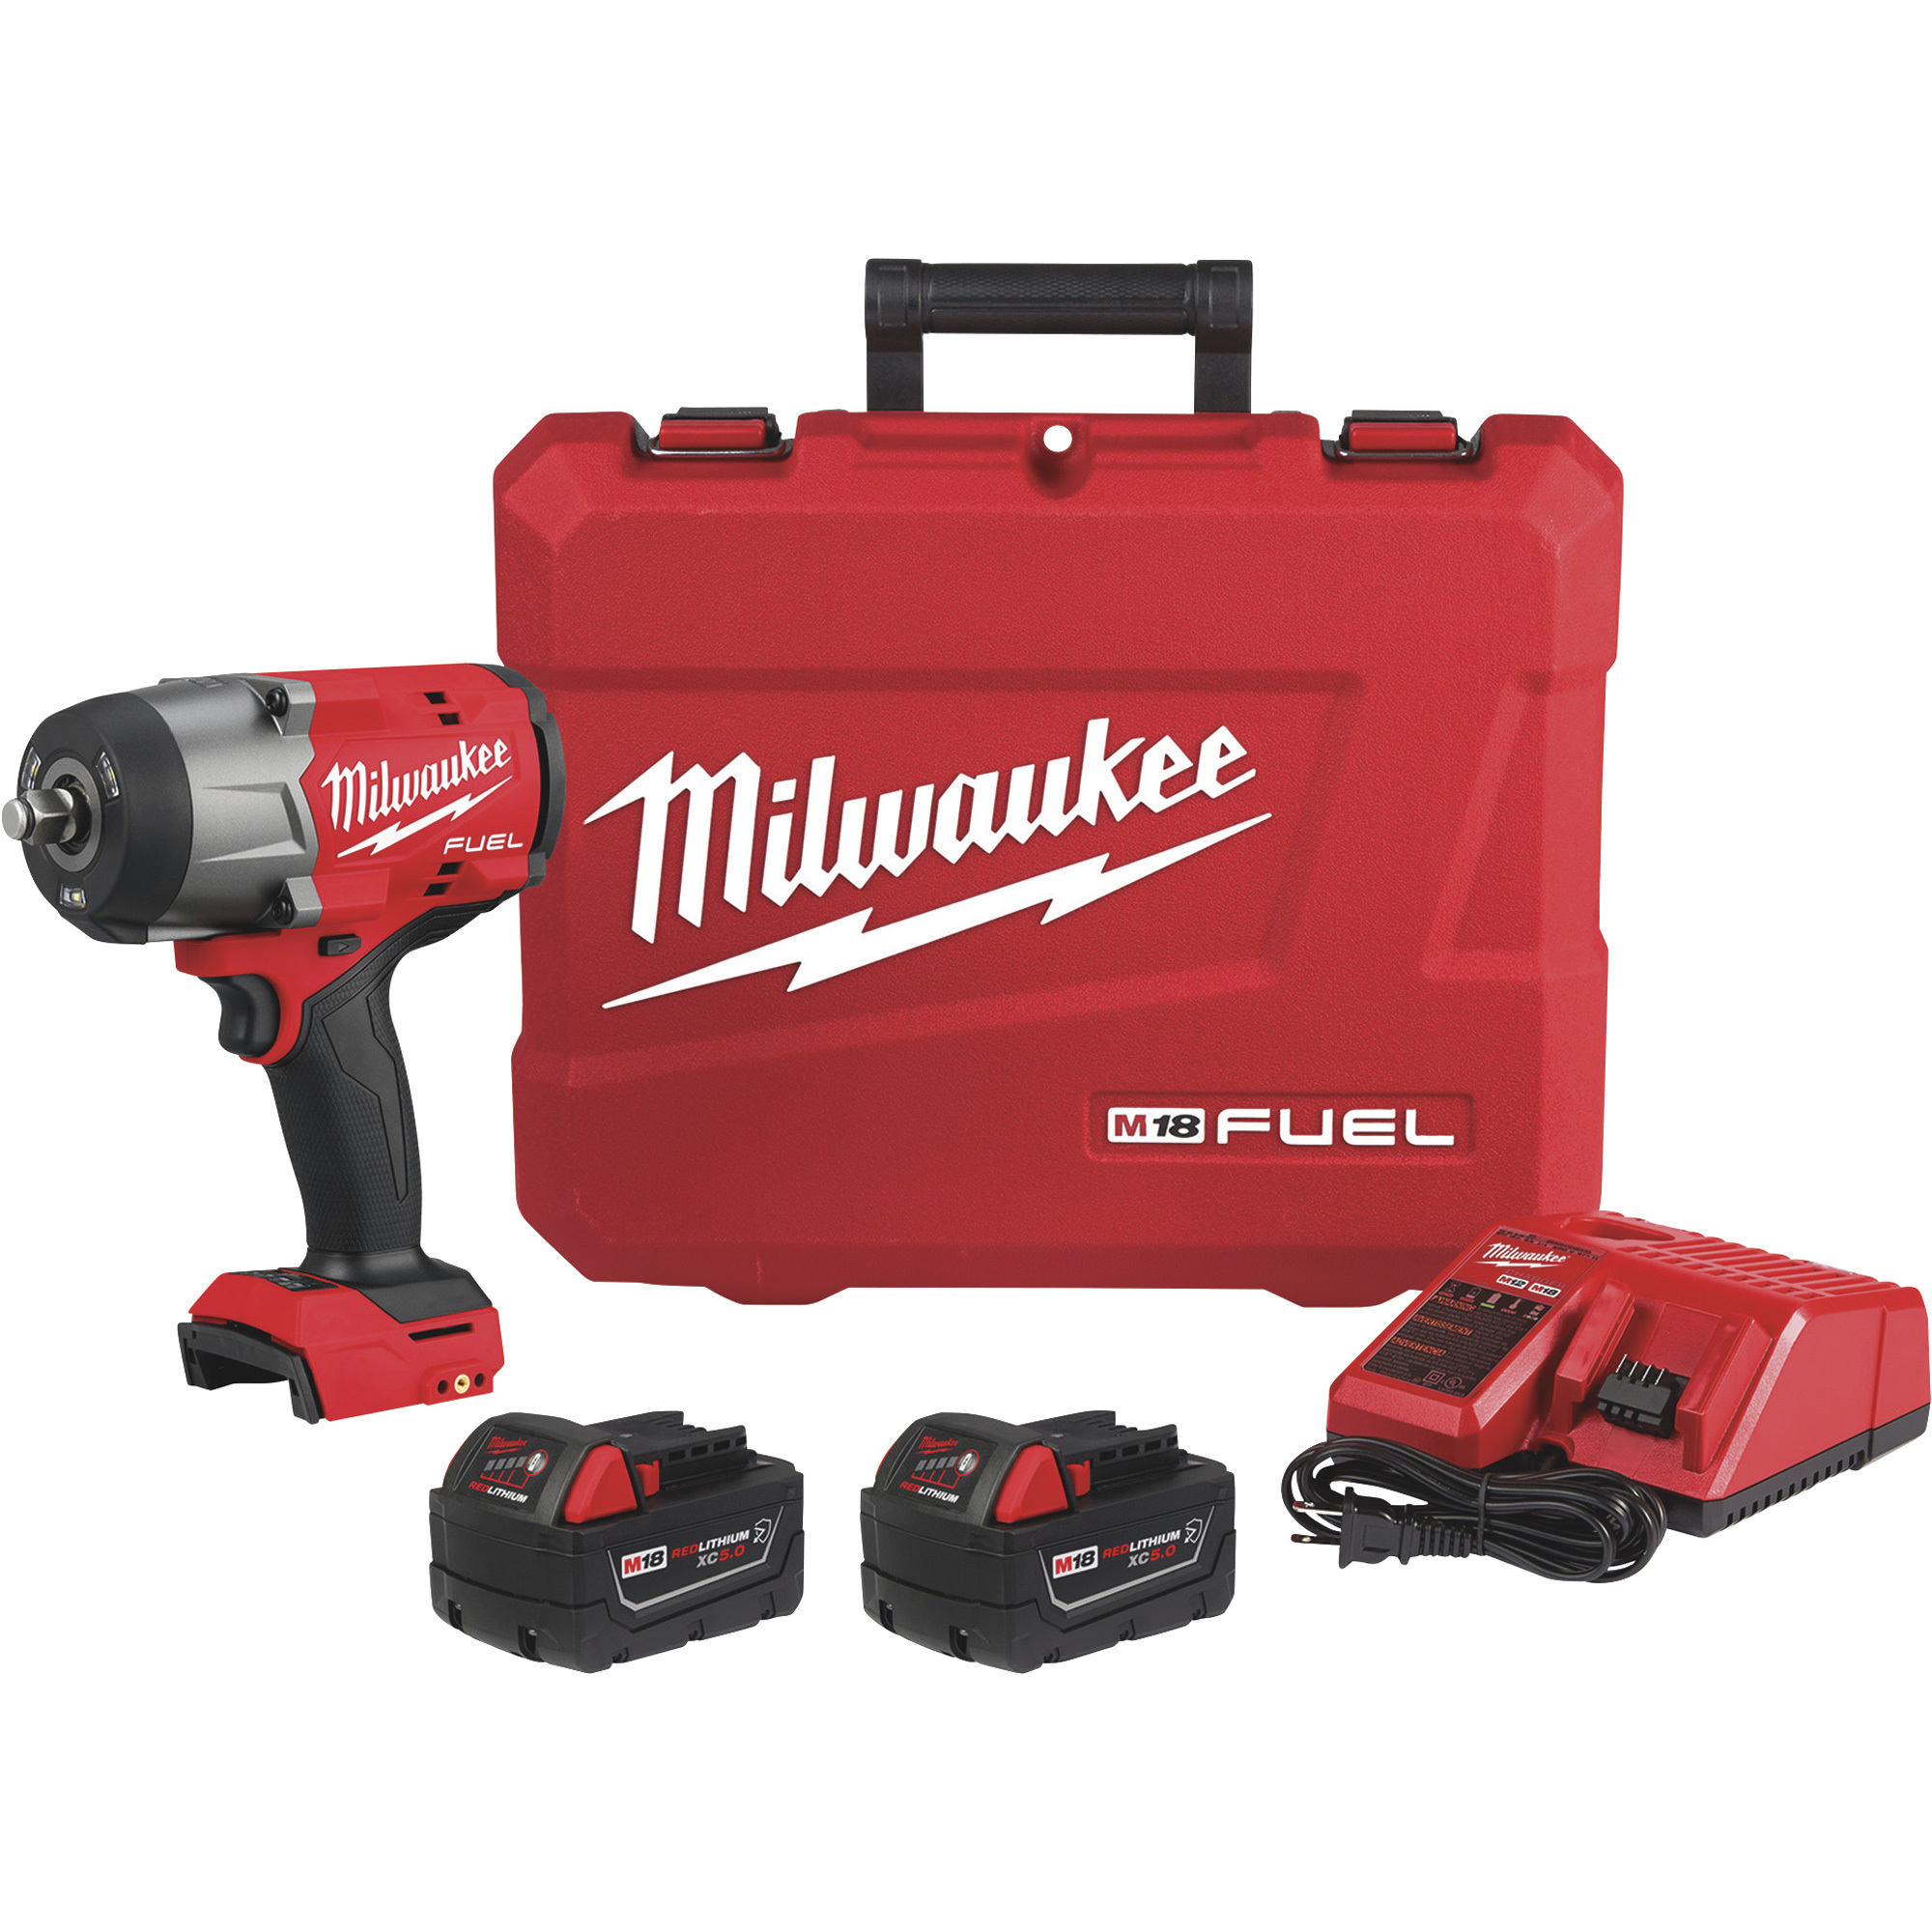 M18 1/2Inch High Torque Impact Wrench FrictRing Kit, Drive Size 1/2 in, Volts 18 Battery Type Lithium-ion, Model - Milwaukee 2967-22